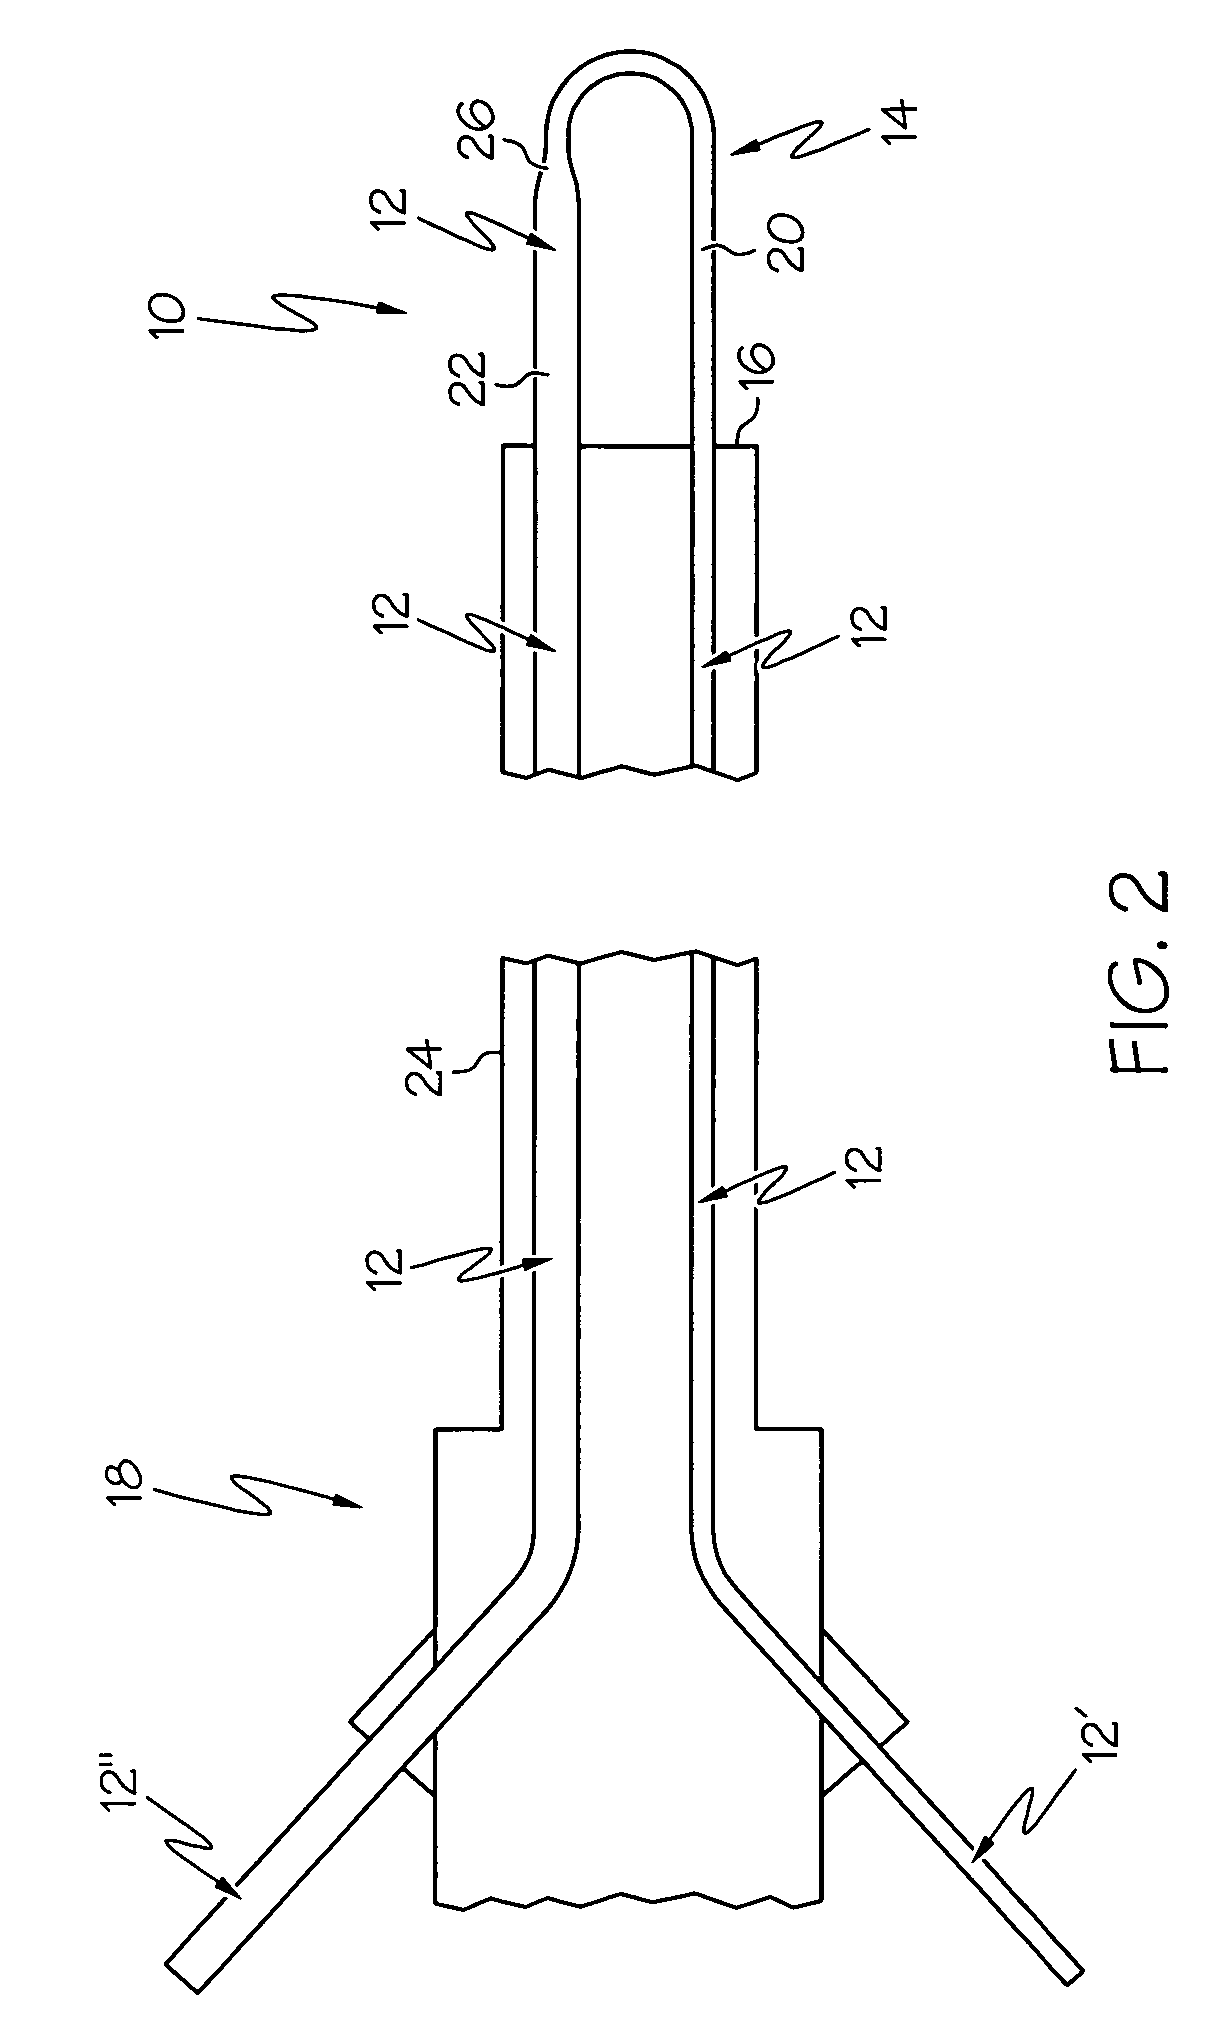 Medical instrument having a catheter and a medical guidewire